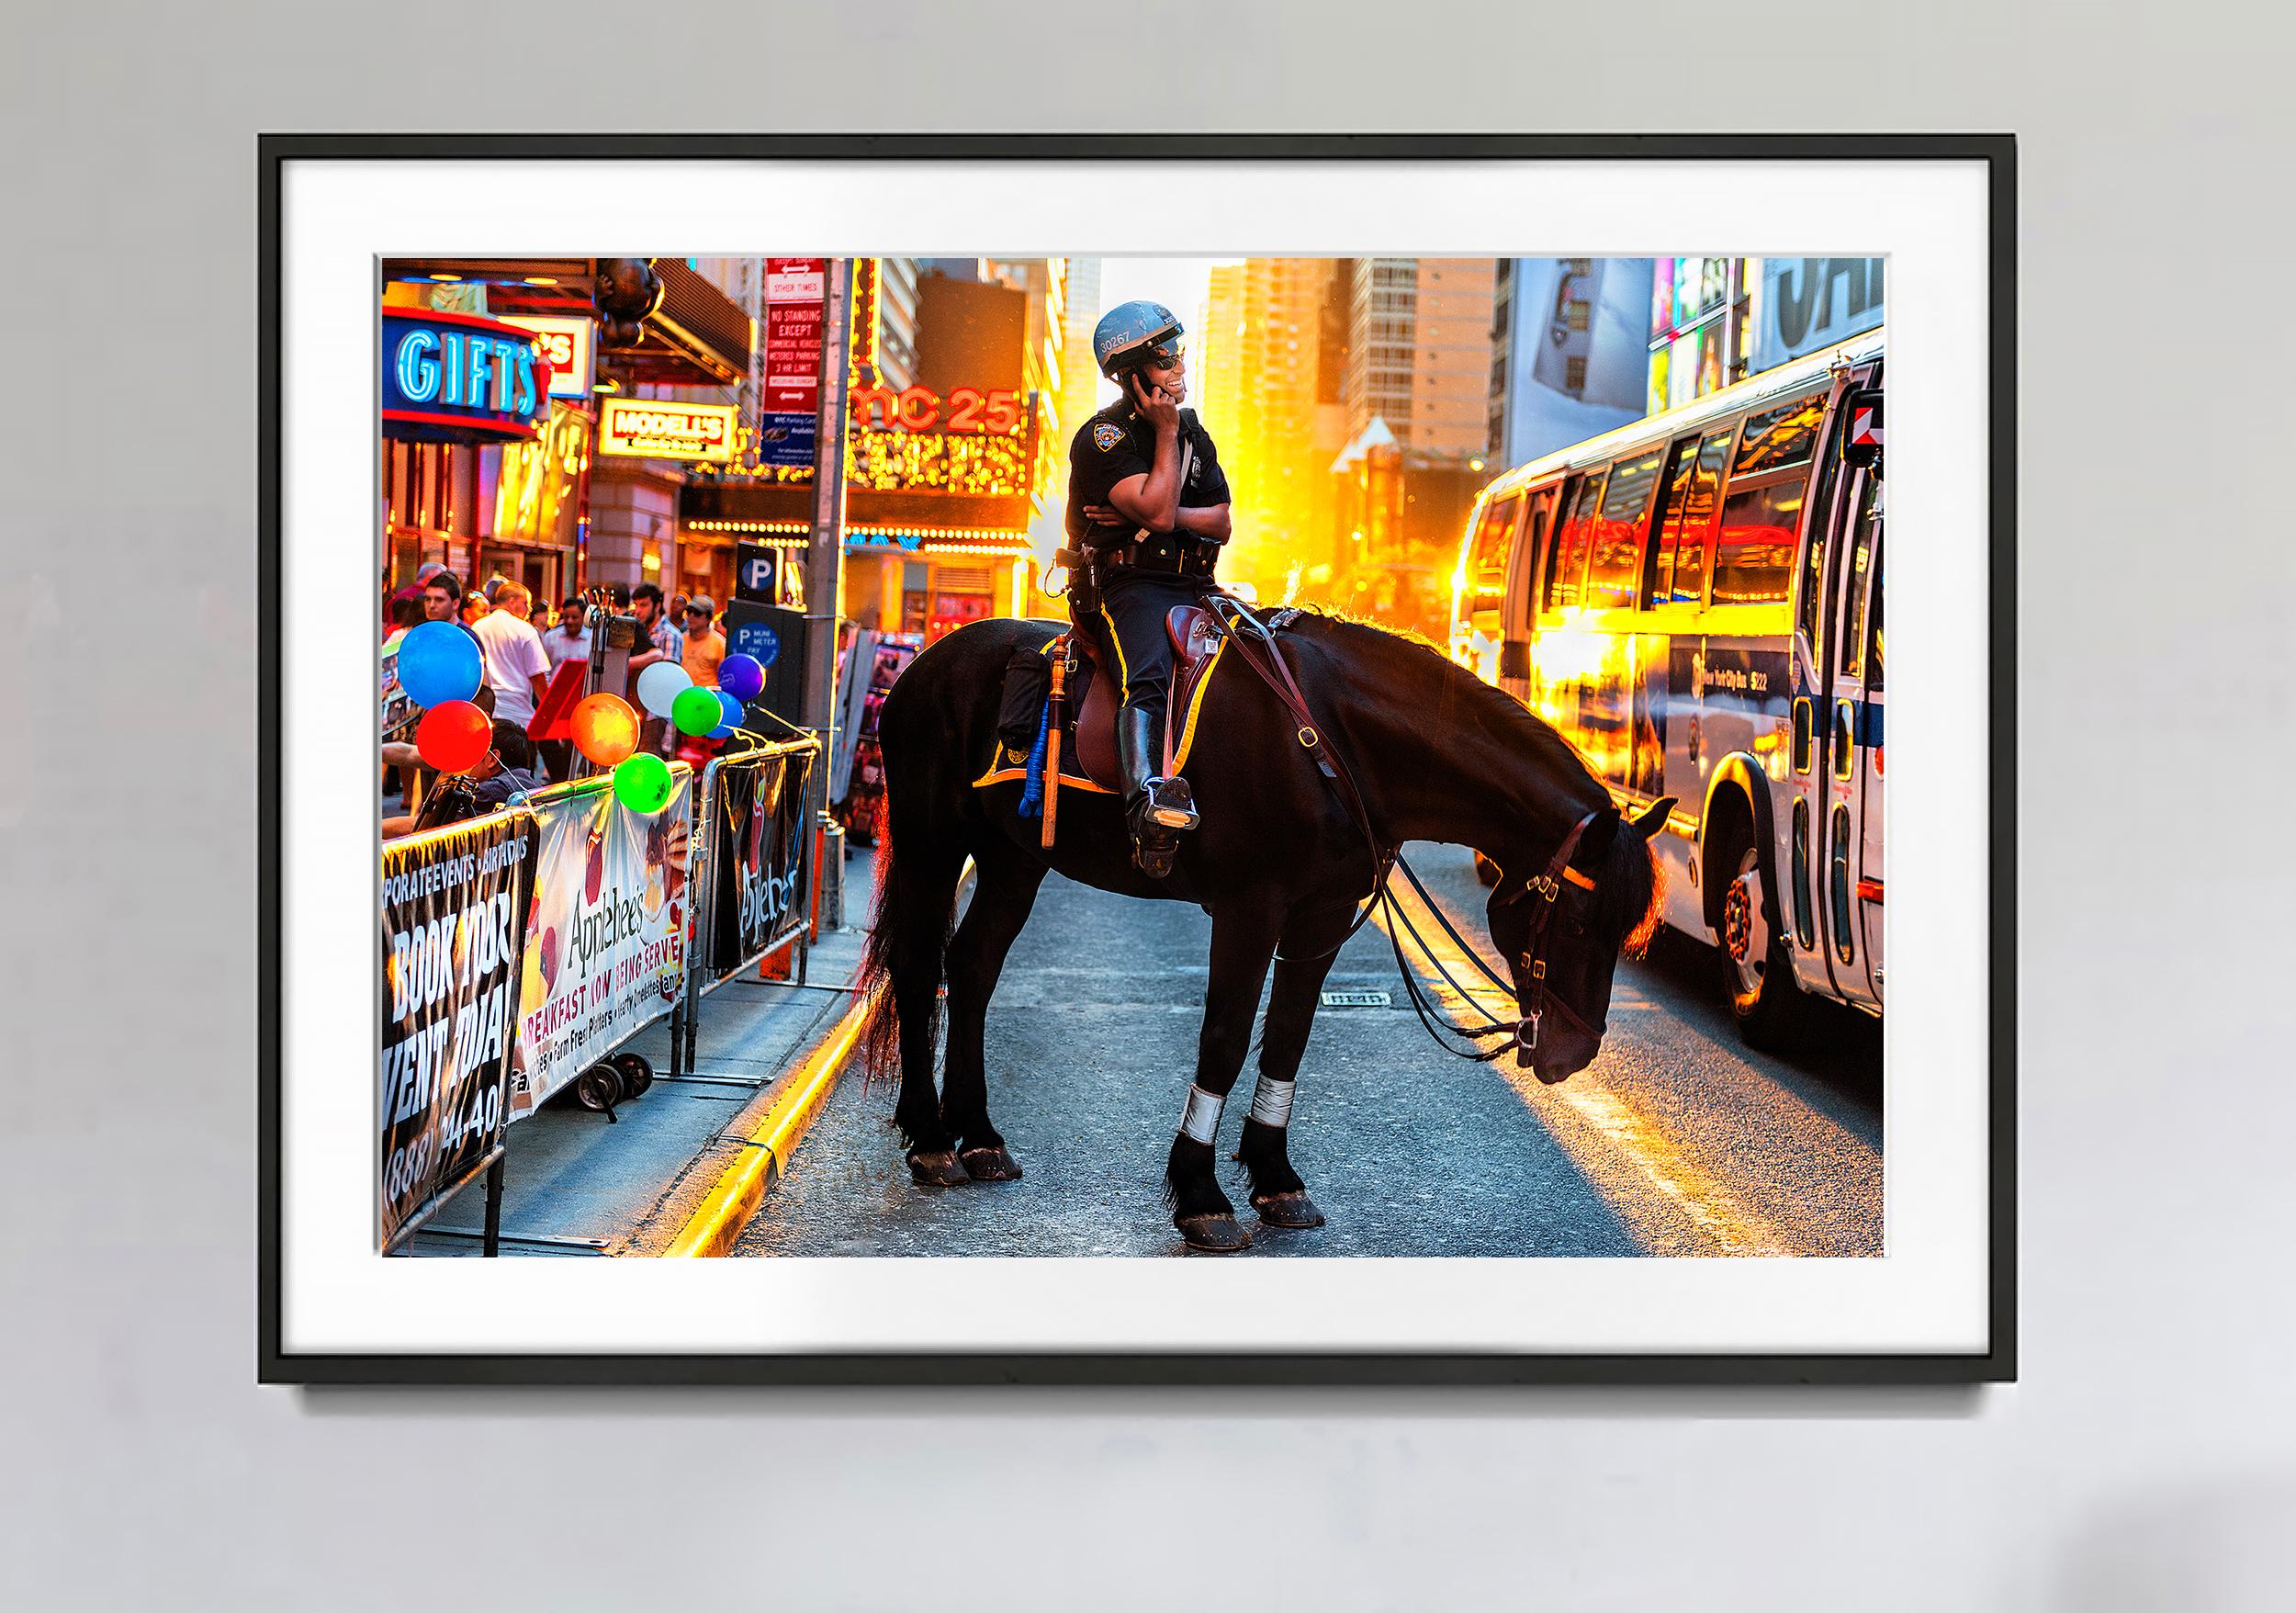 Laughing Policeman on Horse 42nd Street Times Square Golden Light - Photograph by Mitchell Funk